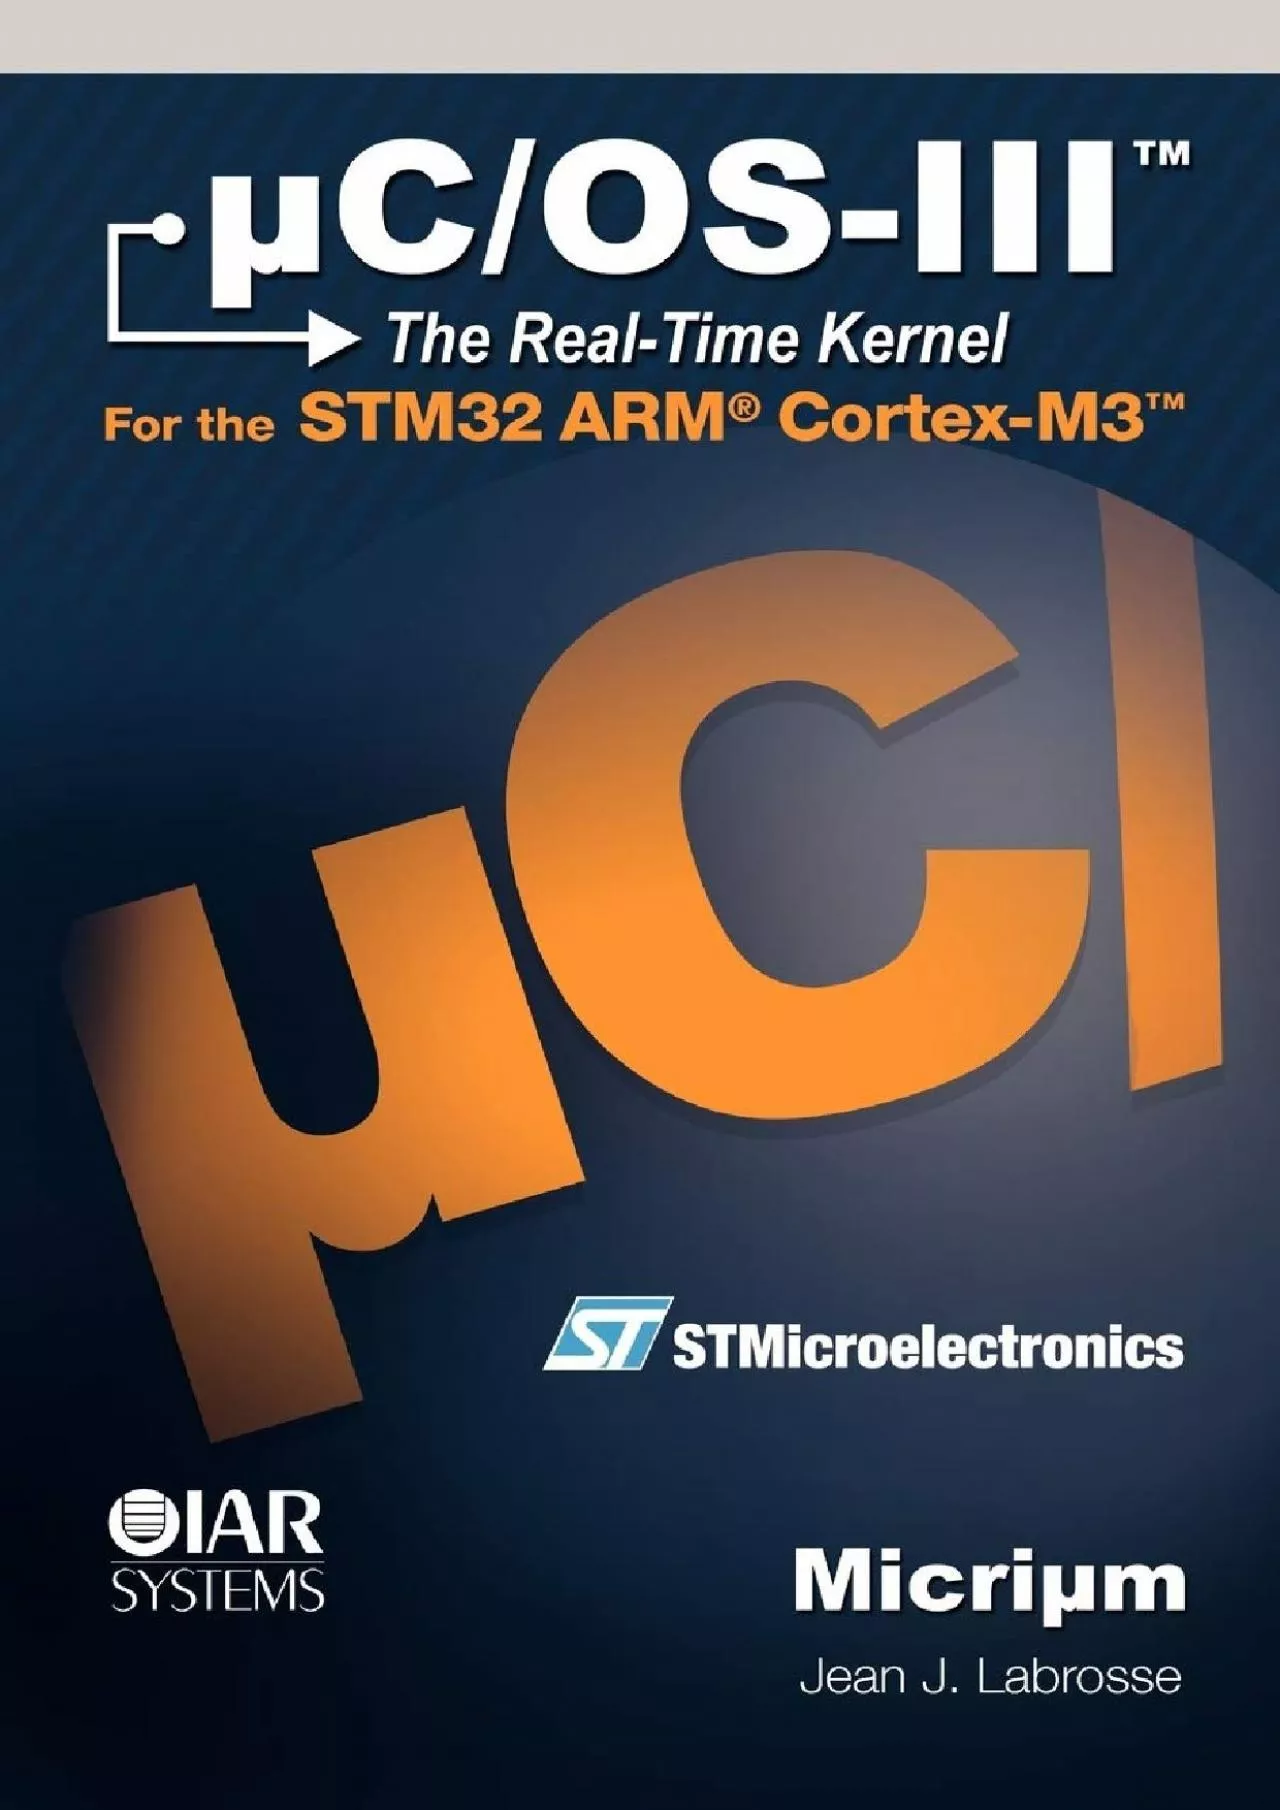 [FREE]-uC/OS-III, The Real-Time Kernel, or a High Performance, Scalable, ROMable, Preemptive,